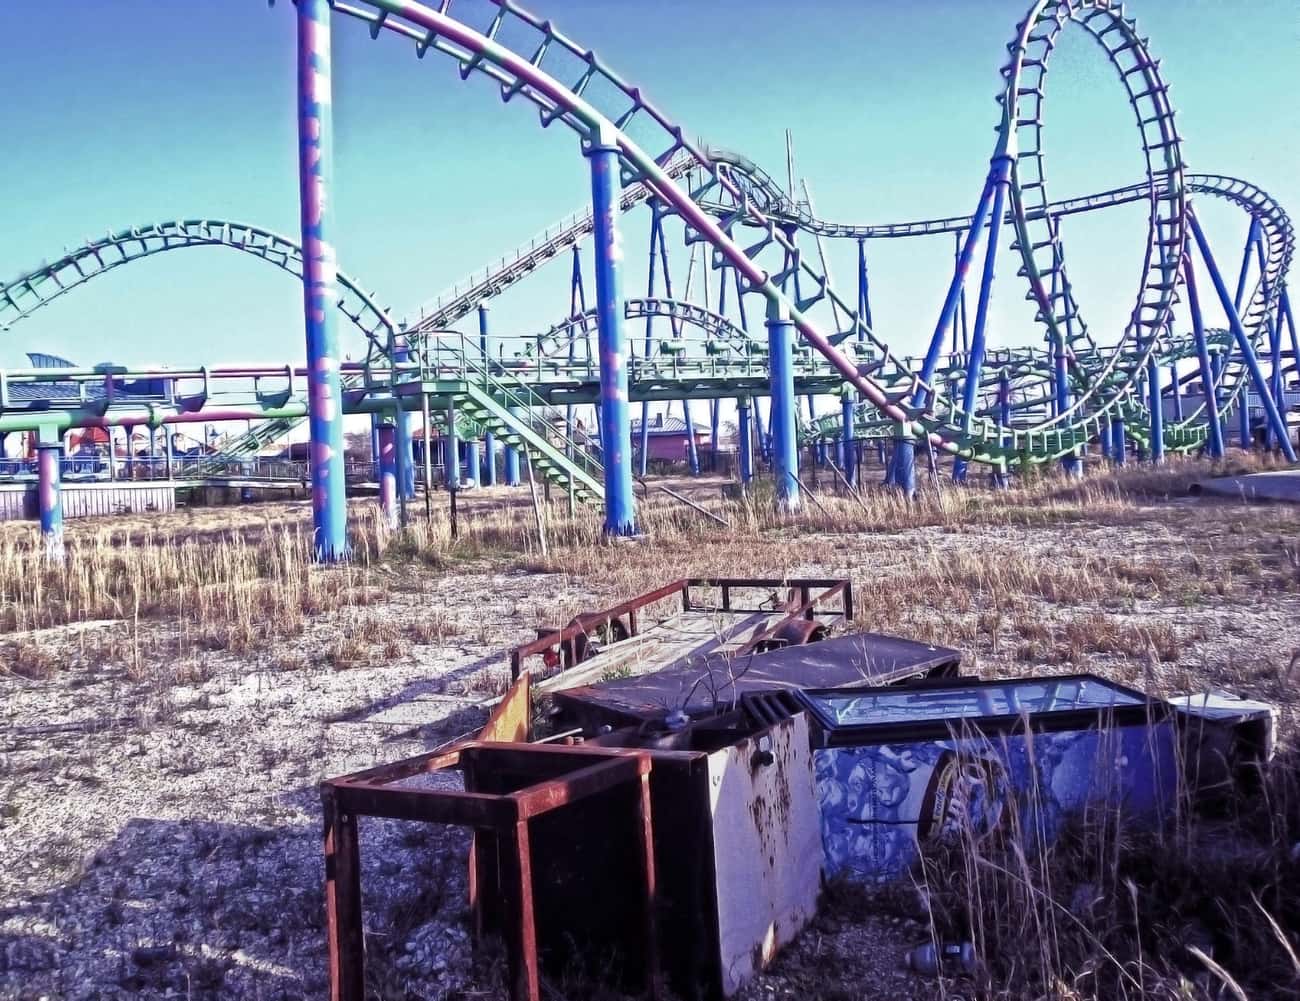 Children's Laughter Is Heard At The Abandoned Six Flags New Orleans